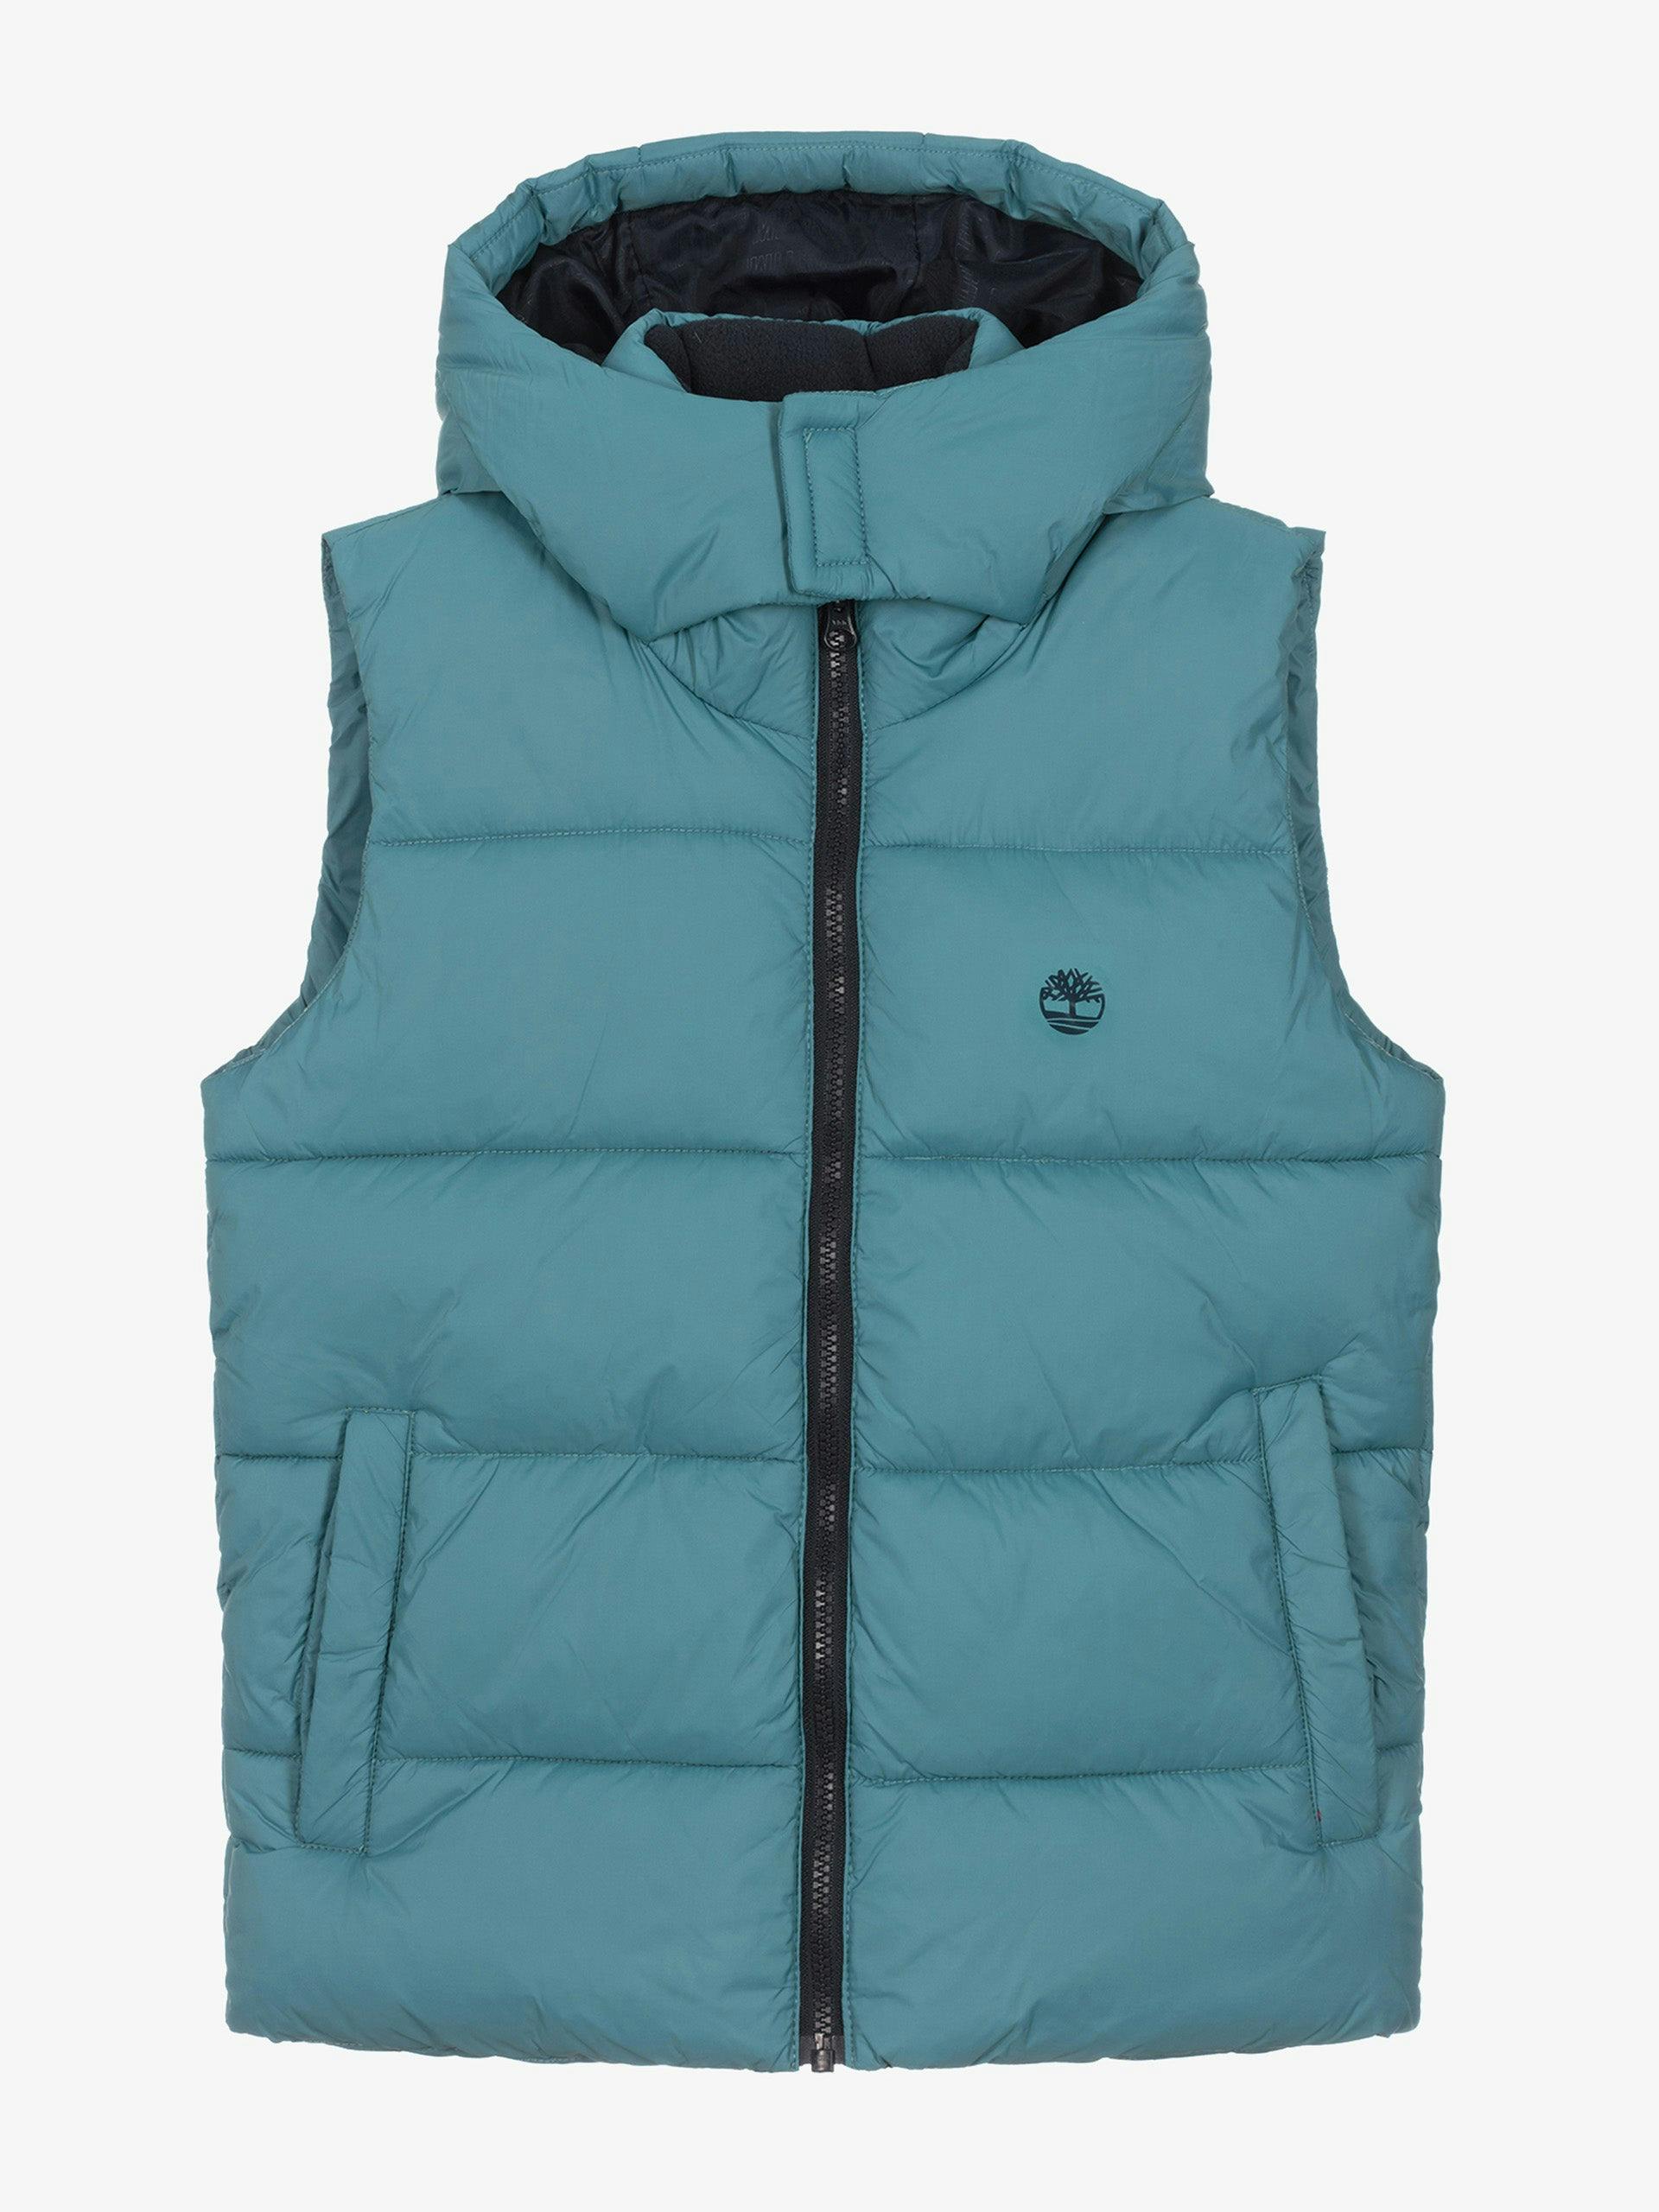 Puffer gilet in turquoise